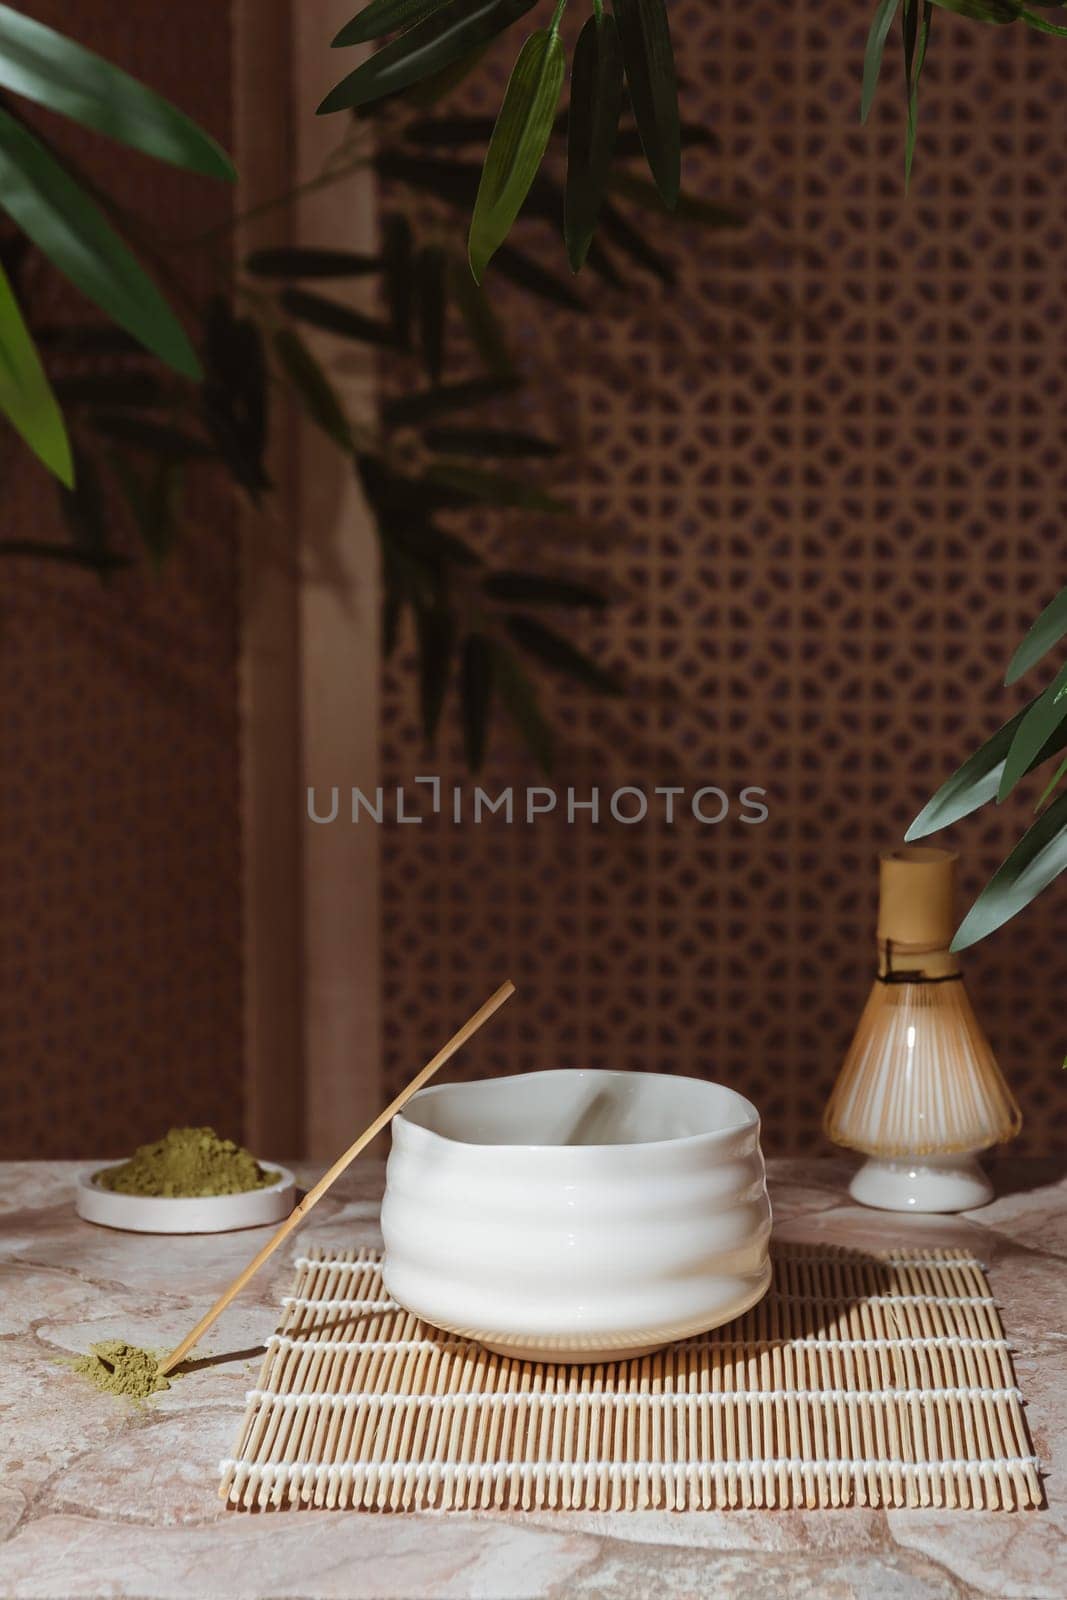 Tea ceremony from the matcha. Japanese traditions of sharing powdered green tea by ElenaNEL